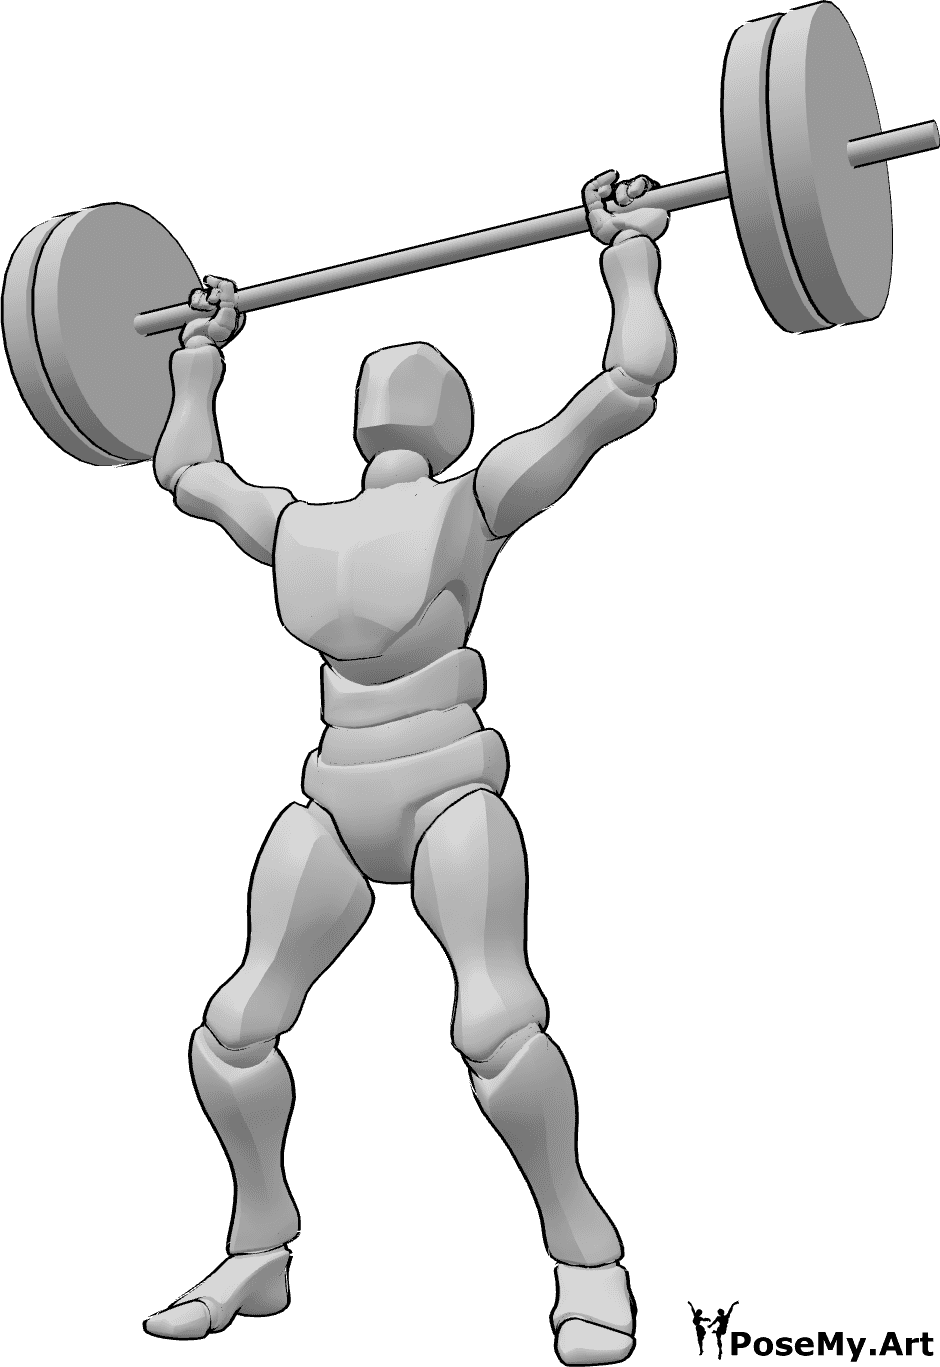 Pose Reference - Male heavy weights pose - Male bodybuilder is lifting heavy weights high with two hands